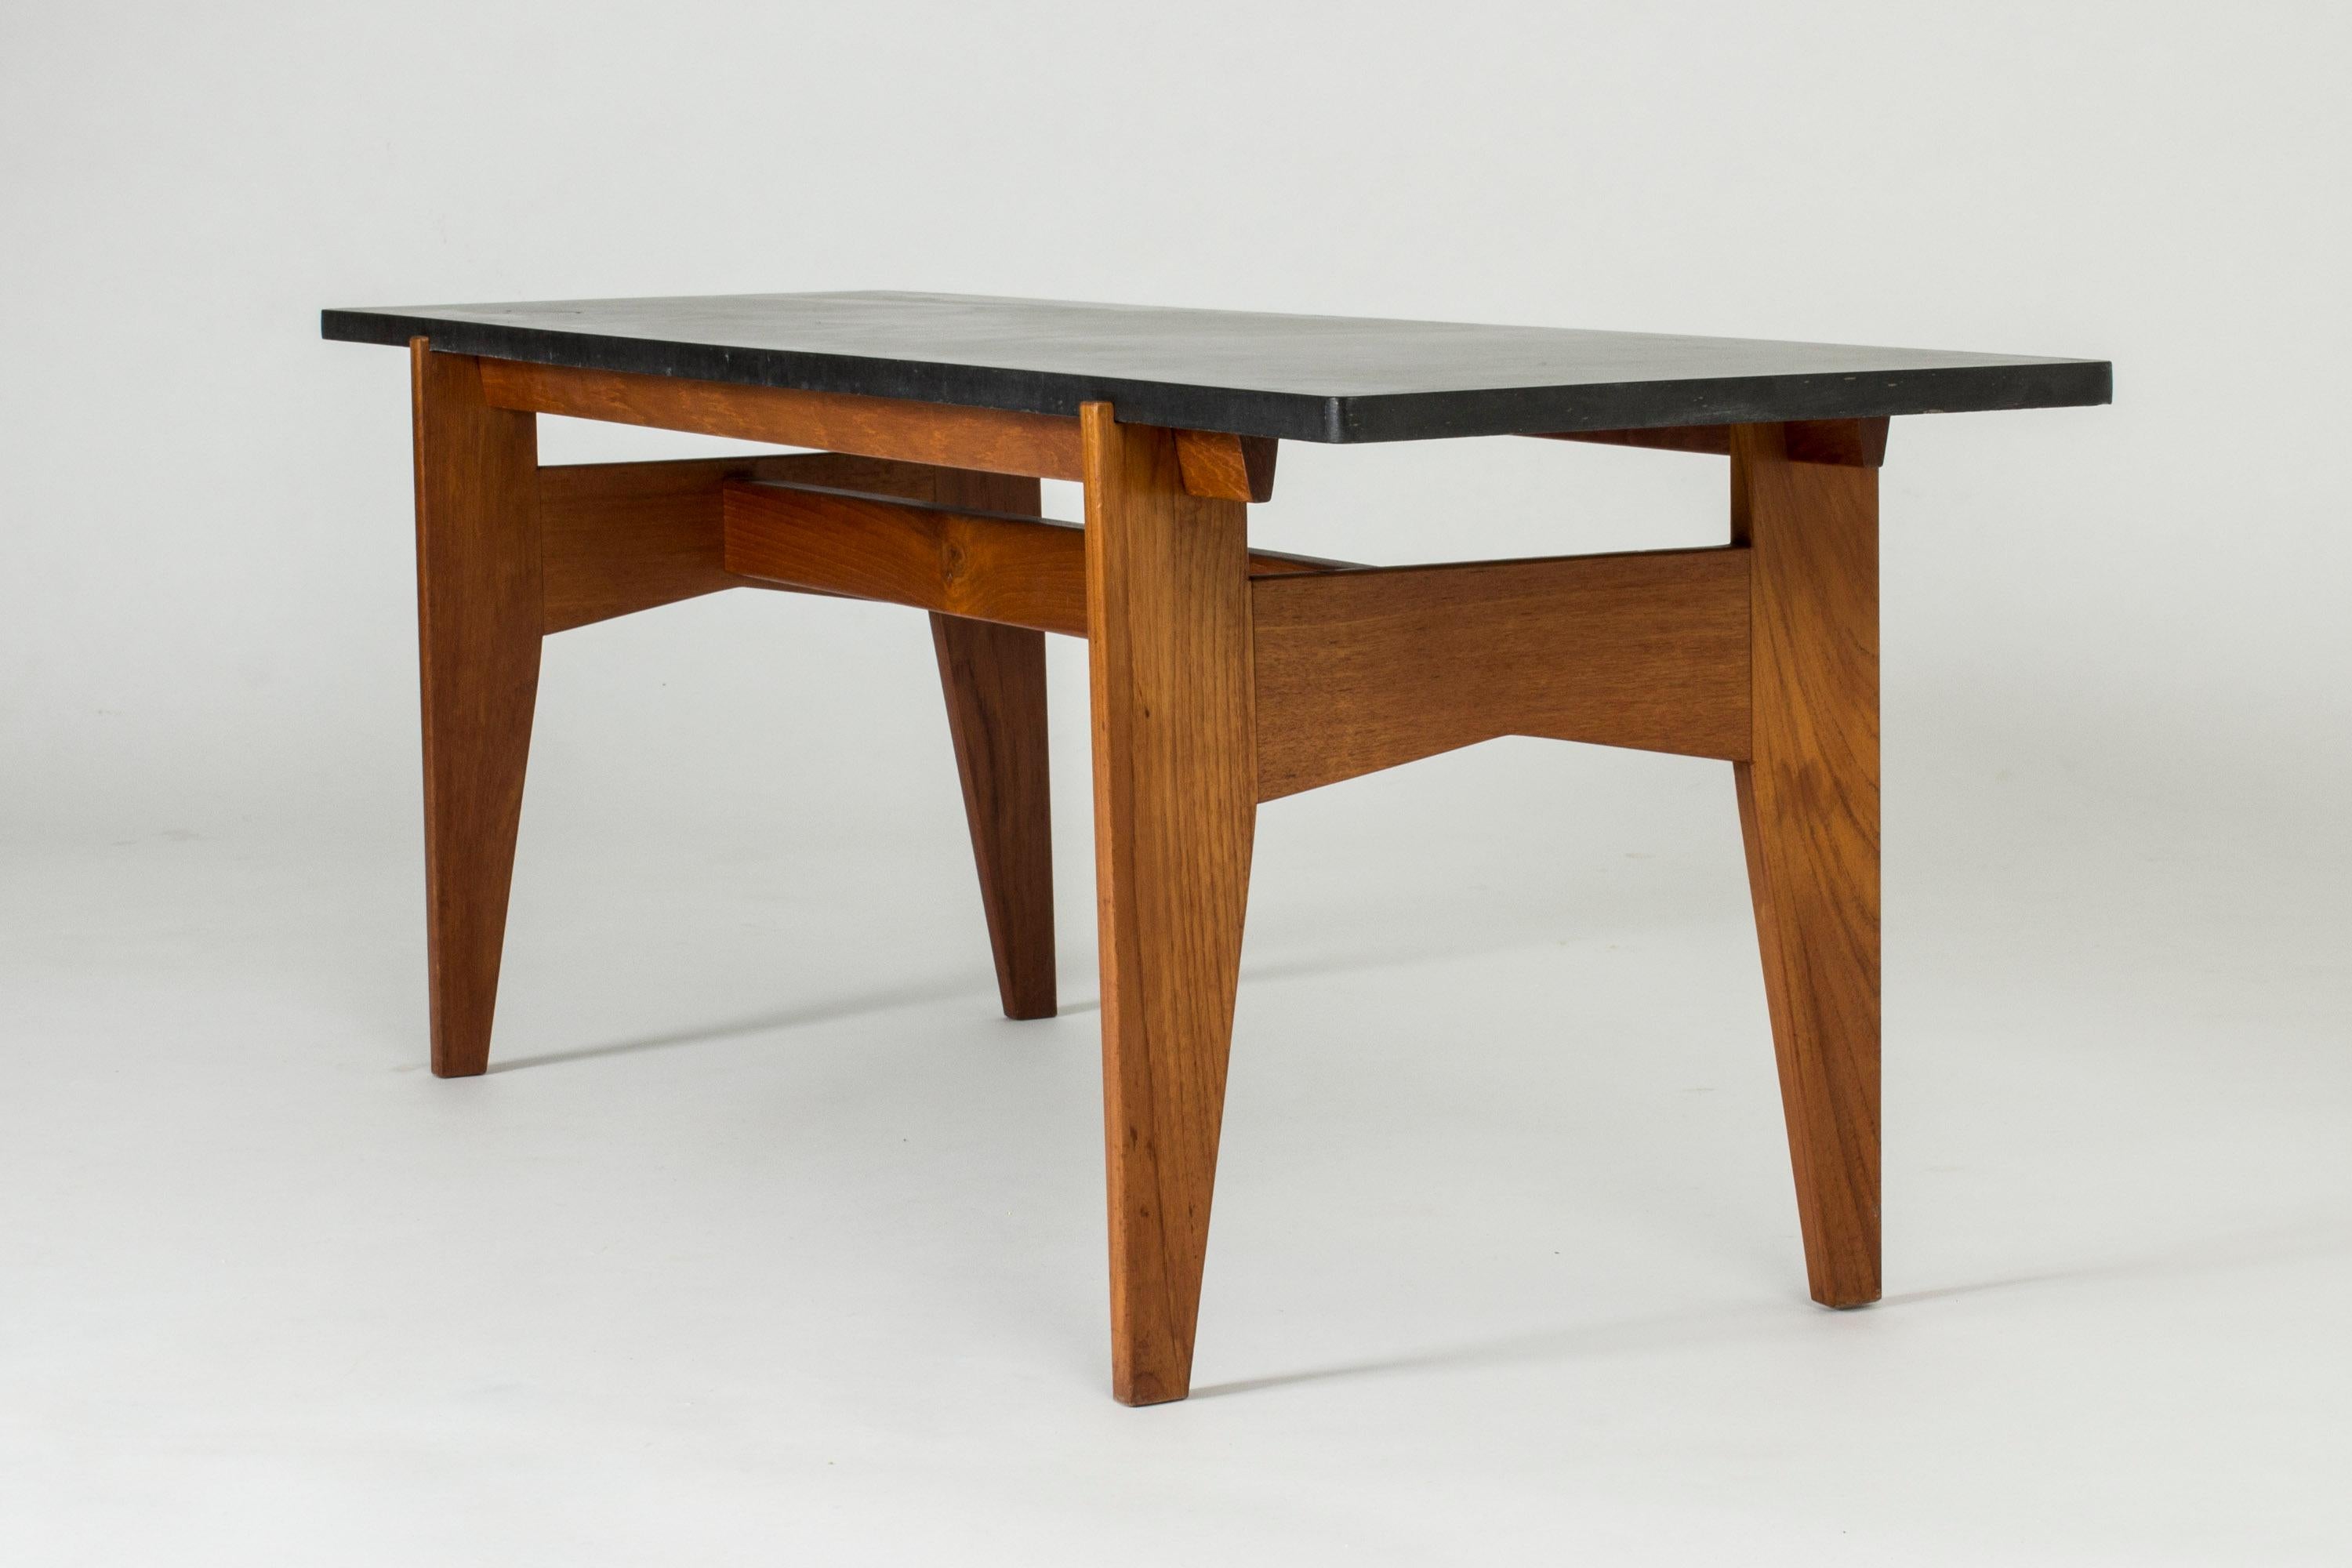 Swedish Teak and Marble Coffee Table by Hans-Agne Jakobsson